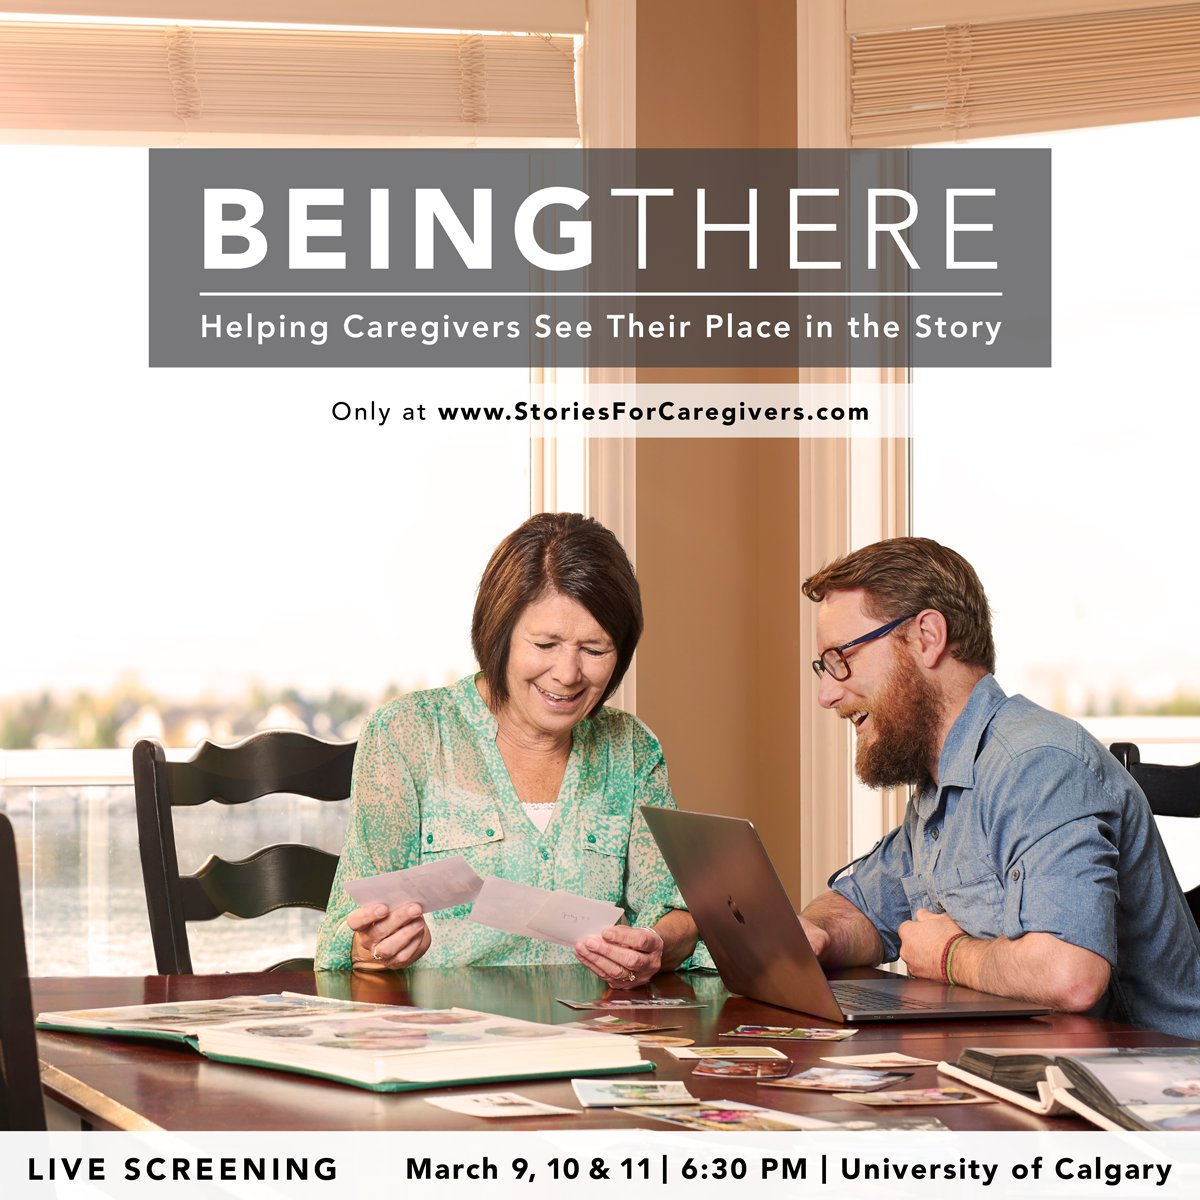 This Sunday, join us for a screening of 'Being There: Caregiving and Mental Health' in support of @CMHACalgary at @UCalgary ow.ly/flqe30iLevj @storiesforcare #yyc #yycfilm #mentalhealth #telus